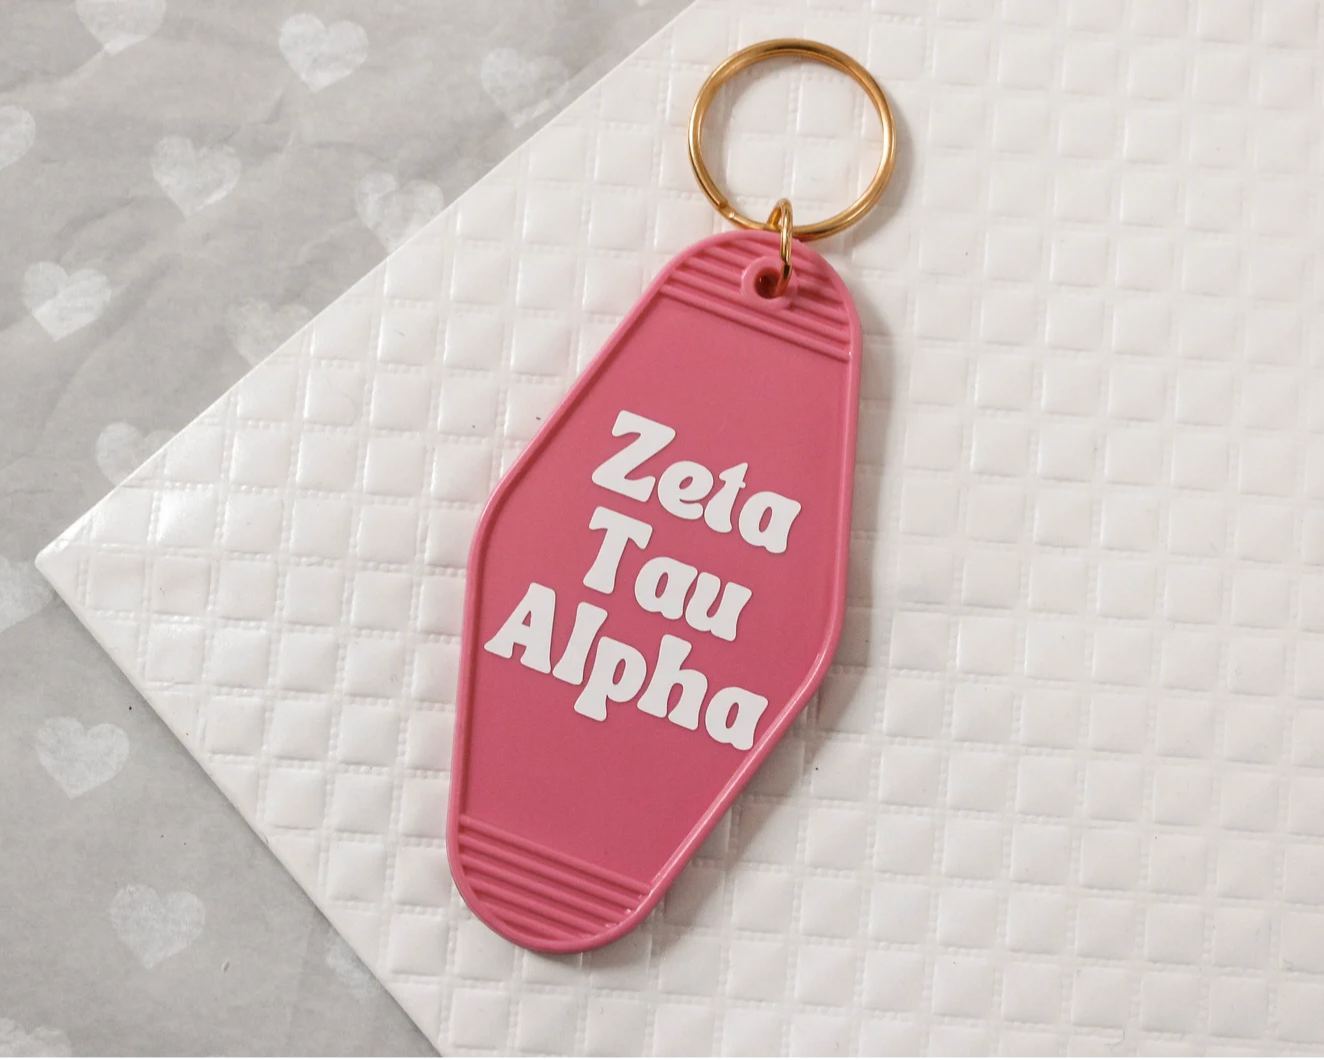 Zeta Tau Alpha Motel Hotel Key Chain in hot pink with white letters and gold ring. ZTA